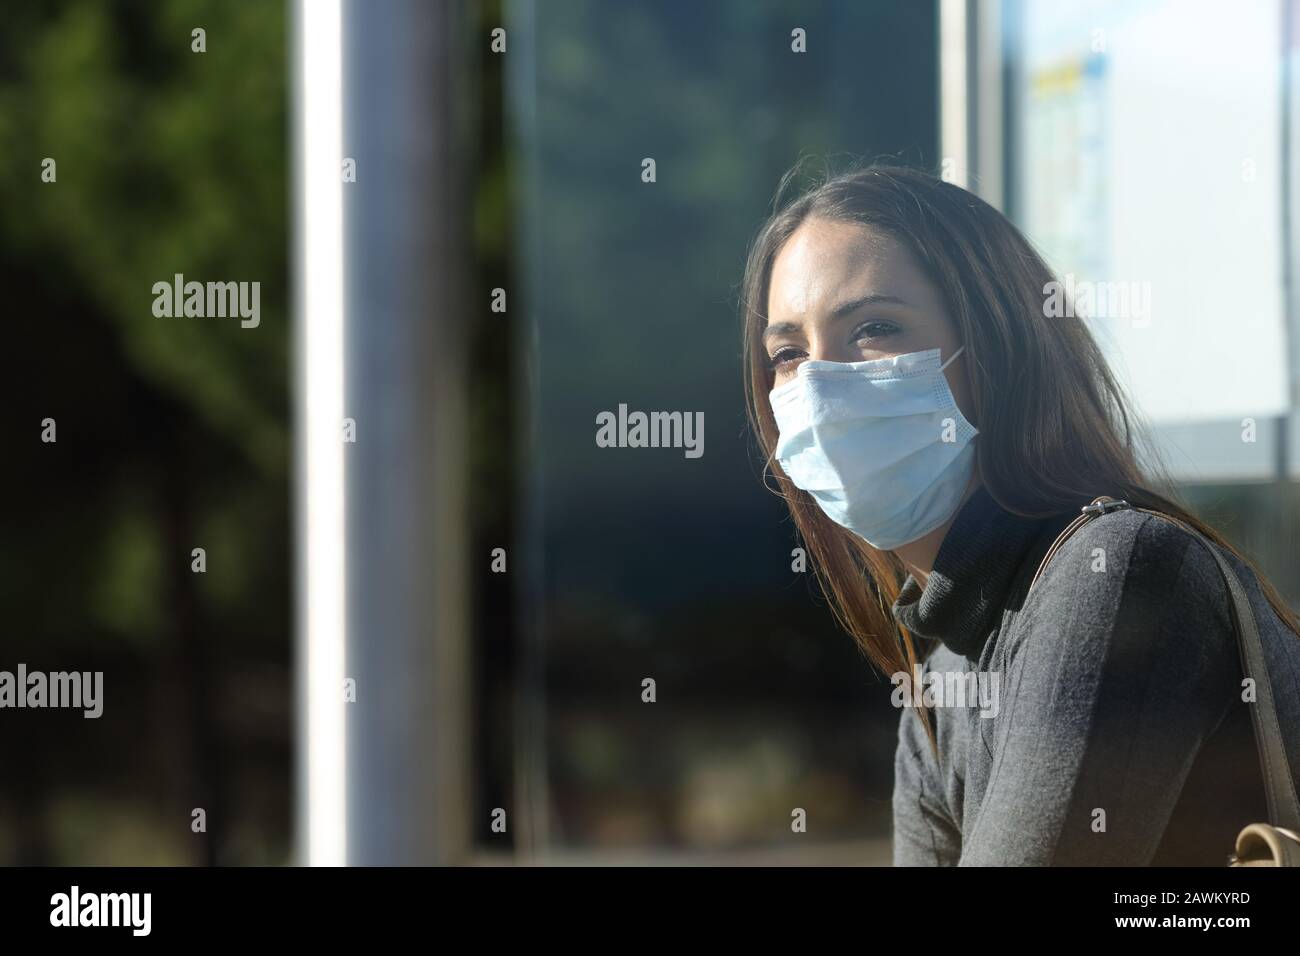 Woman wearing a protective mask to prevent virus contagion waiting in a bus stop Stock Photo